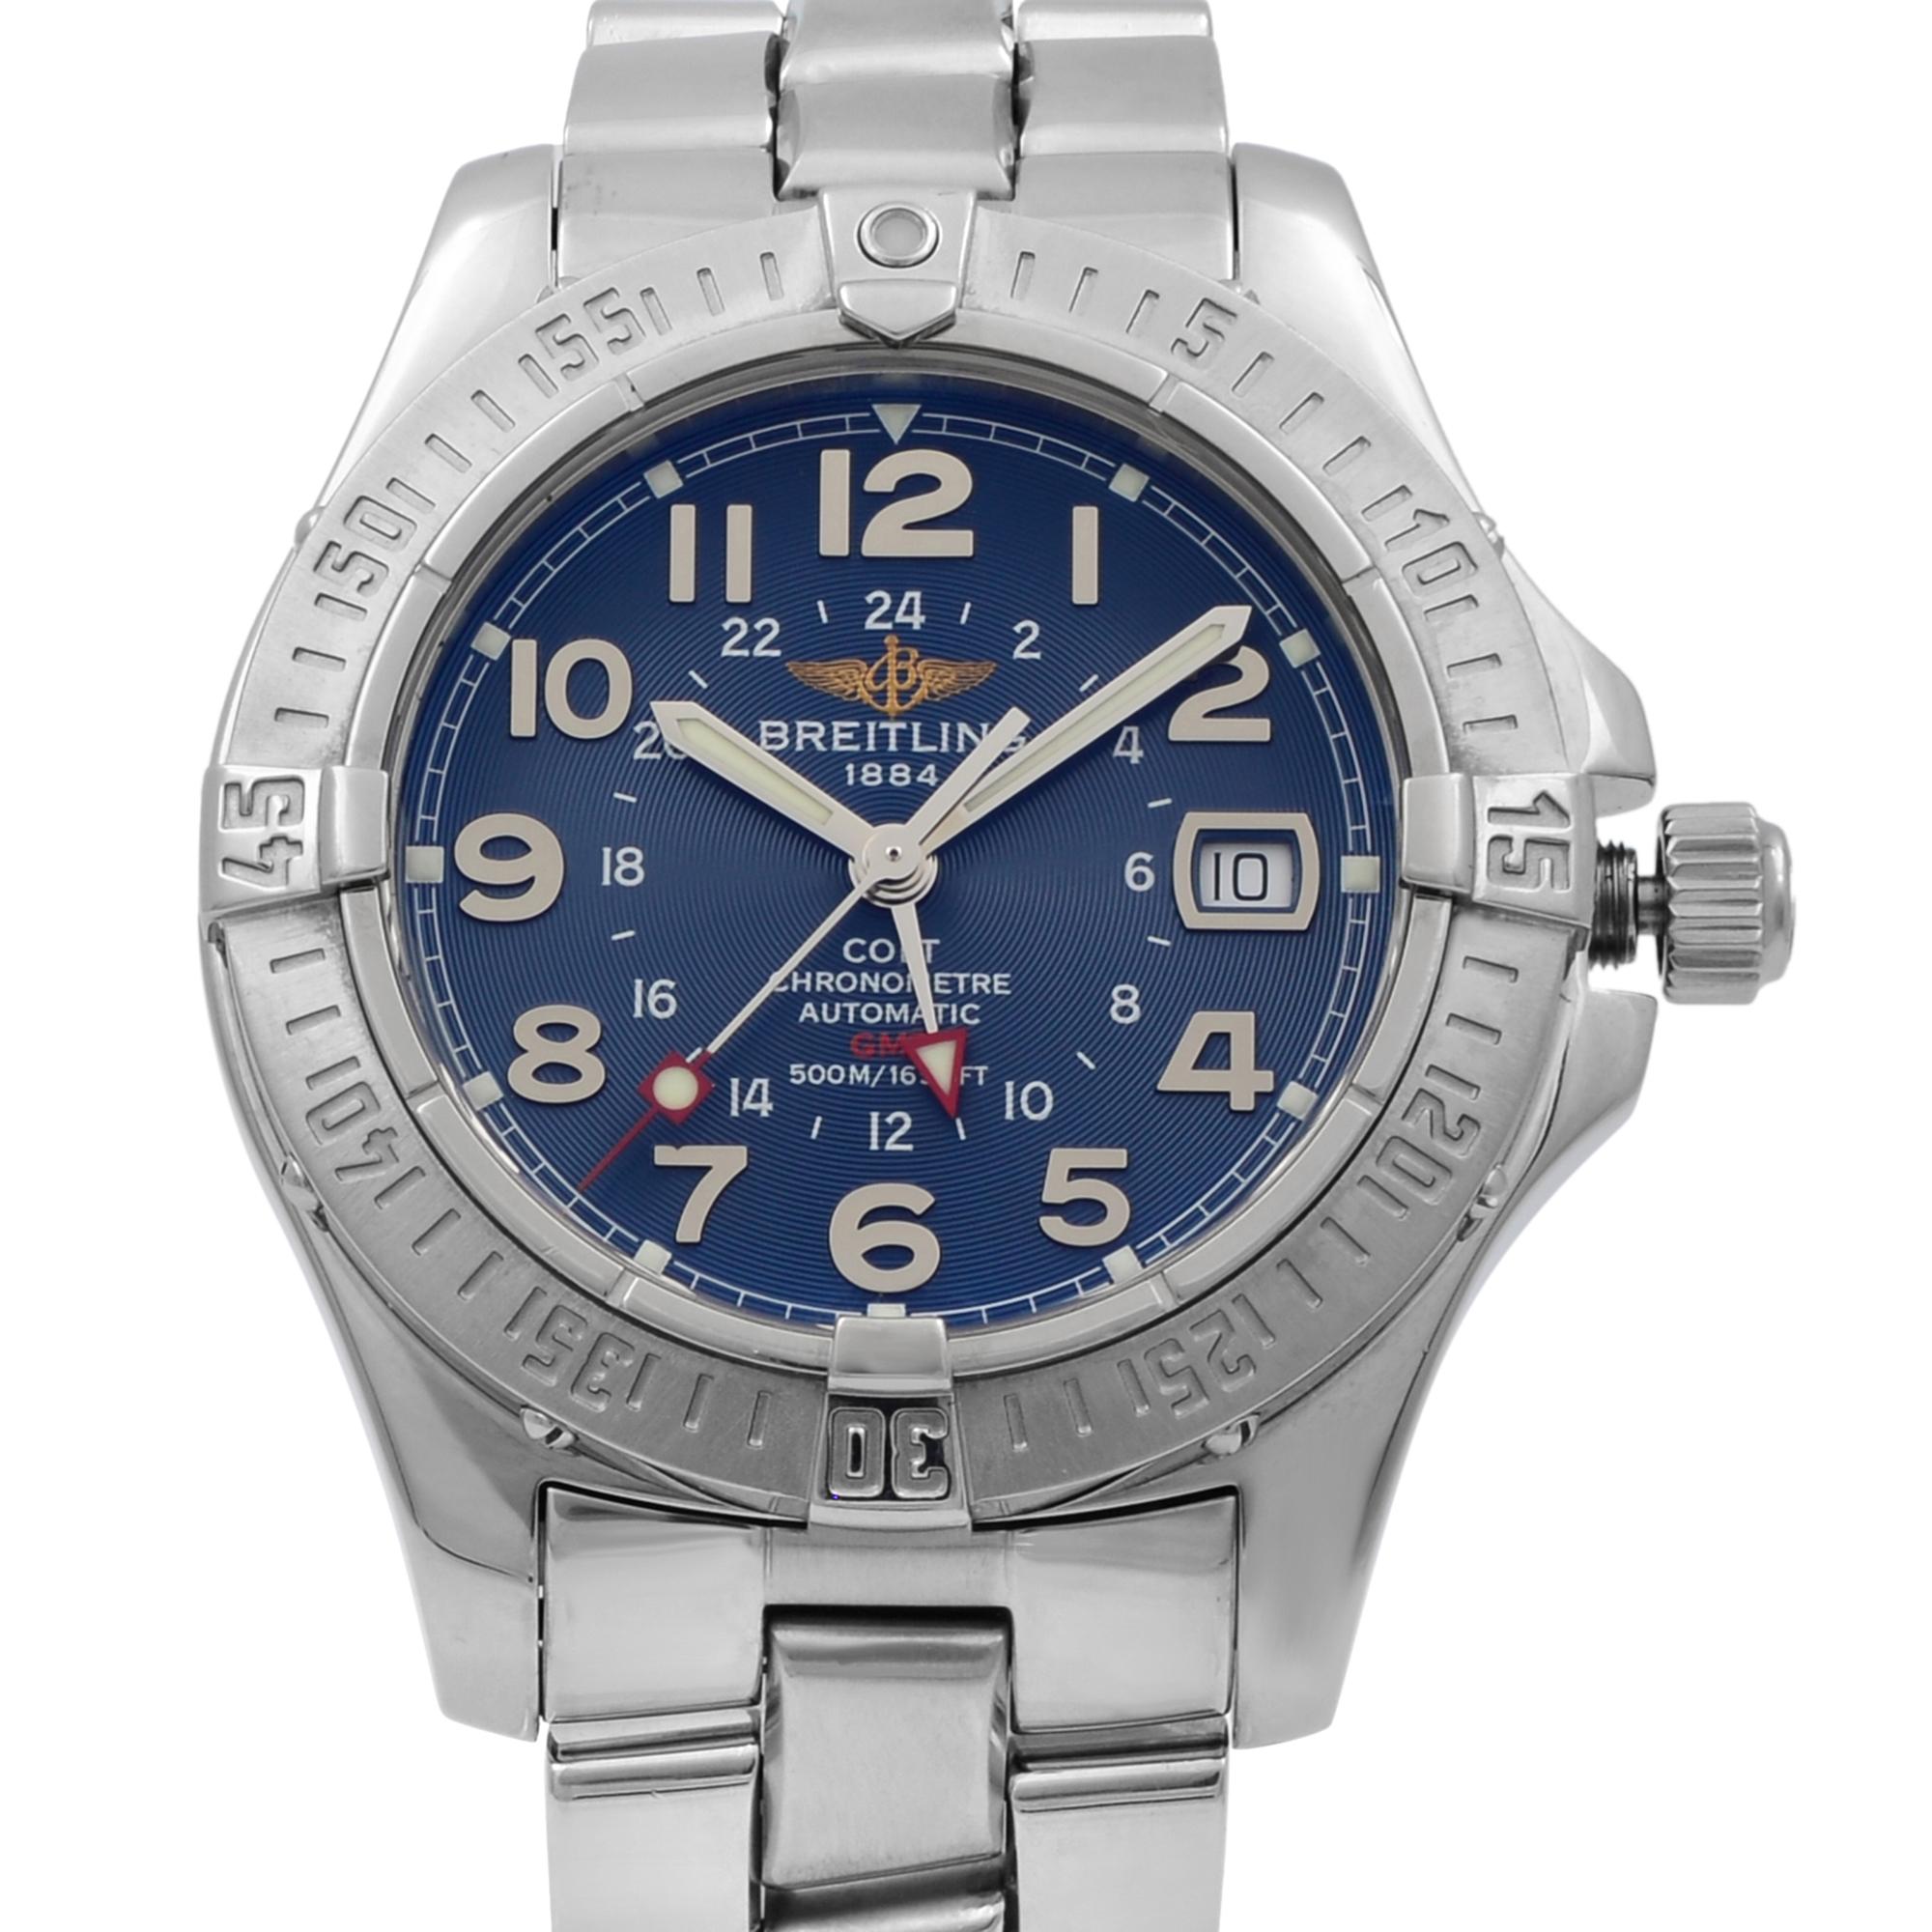 This pre-owned Breitling Colt A32350 is a beautiful men's timepiece that is powered by mechanical (automatic) movement which is cased in a stainless steel case. It has a round shape face, date indicator, dual time dial and has hand arabic numerals